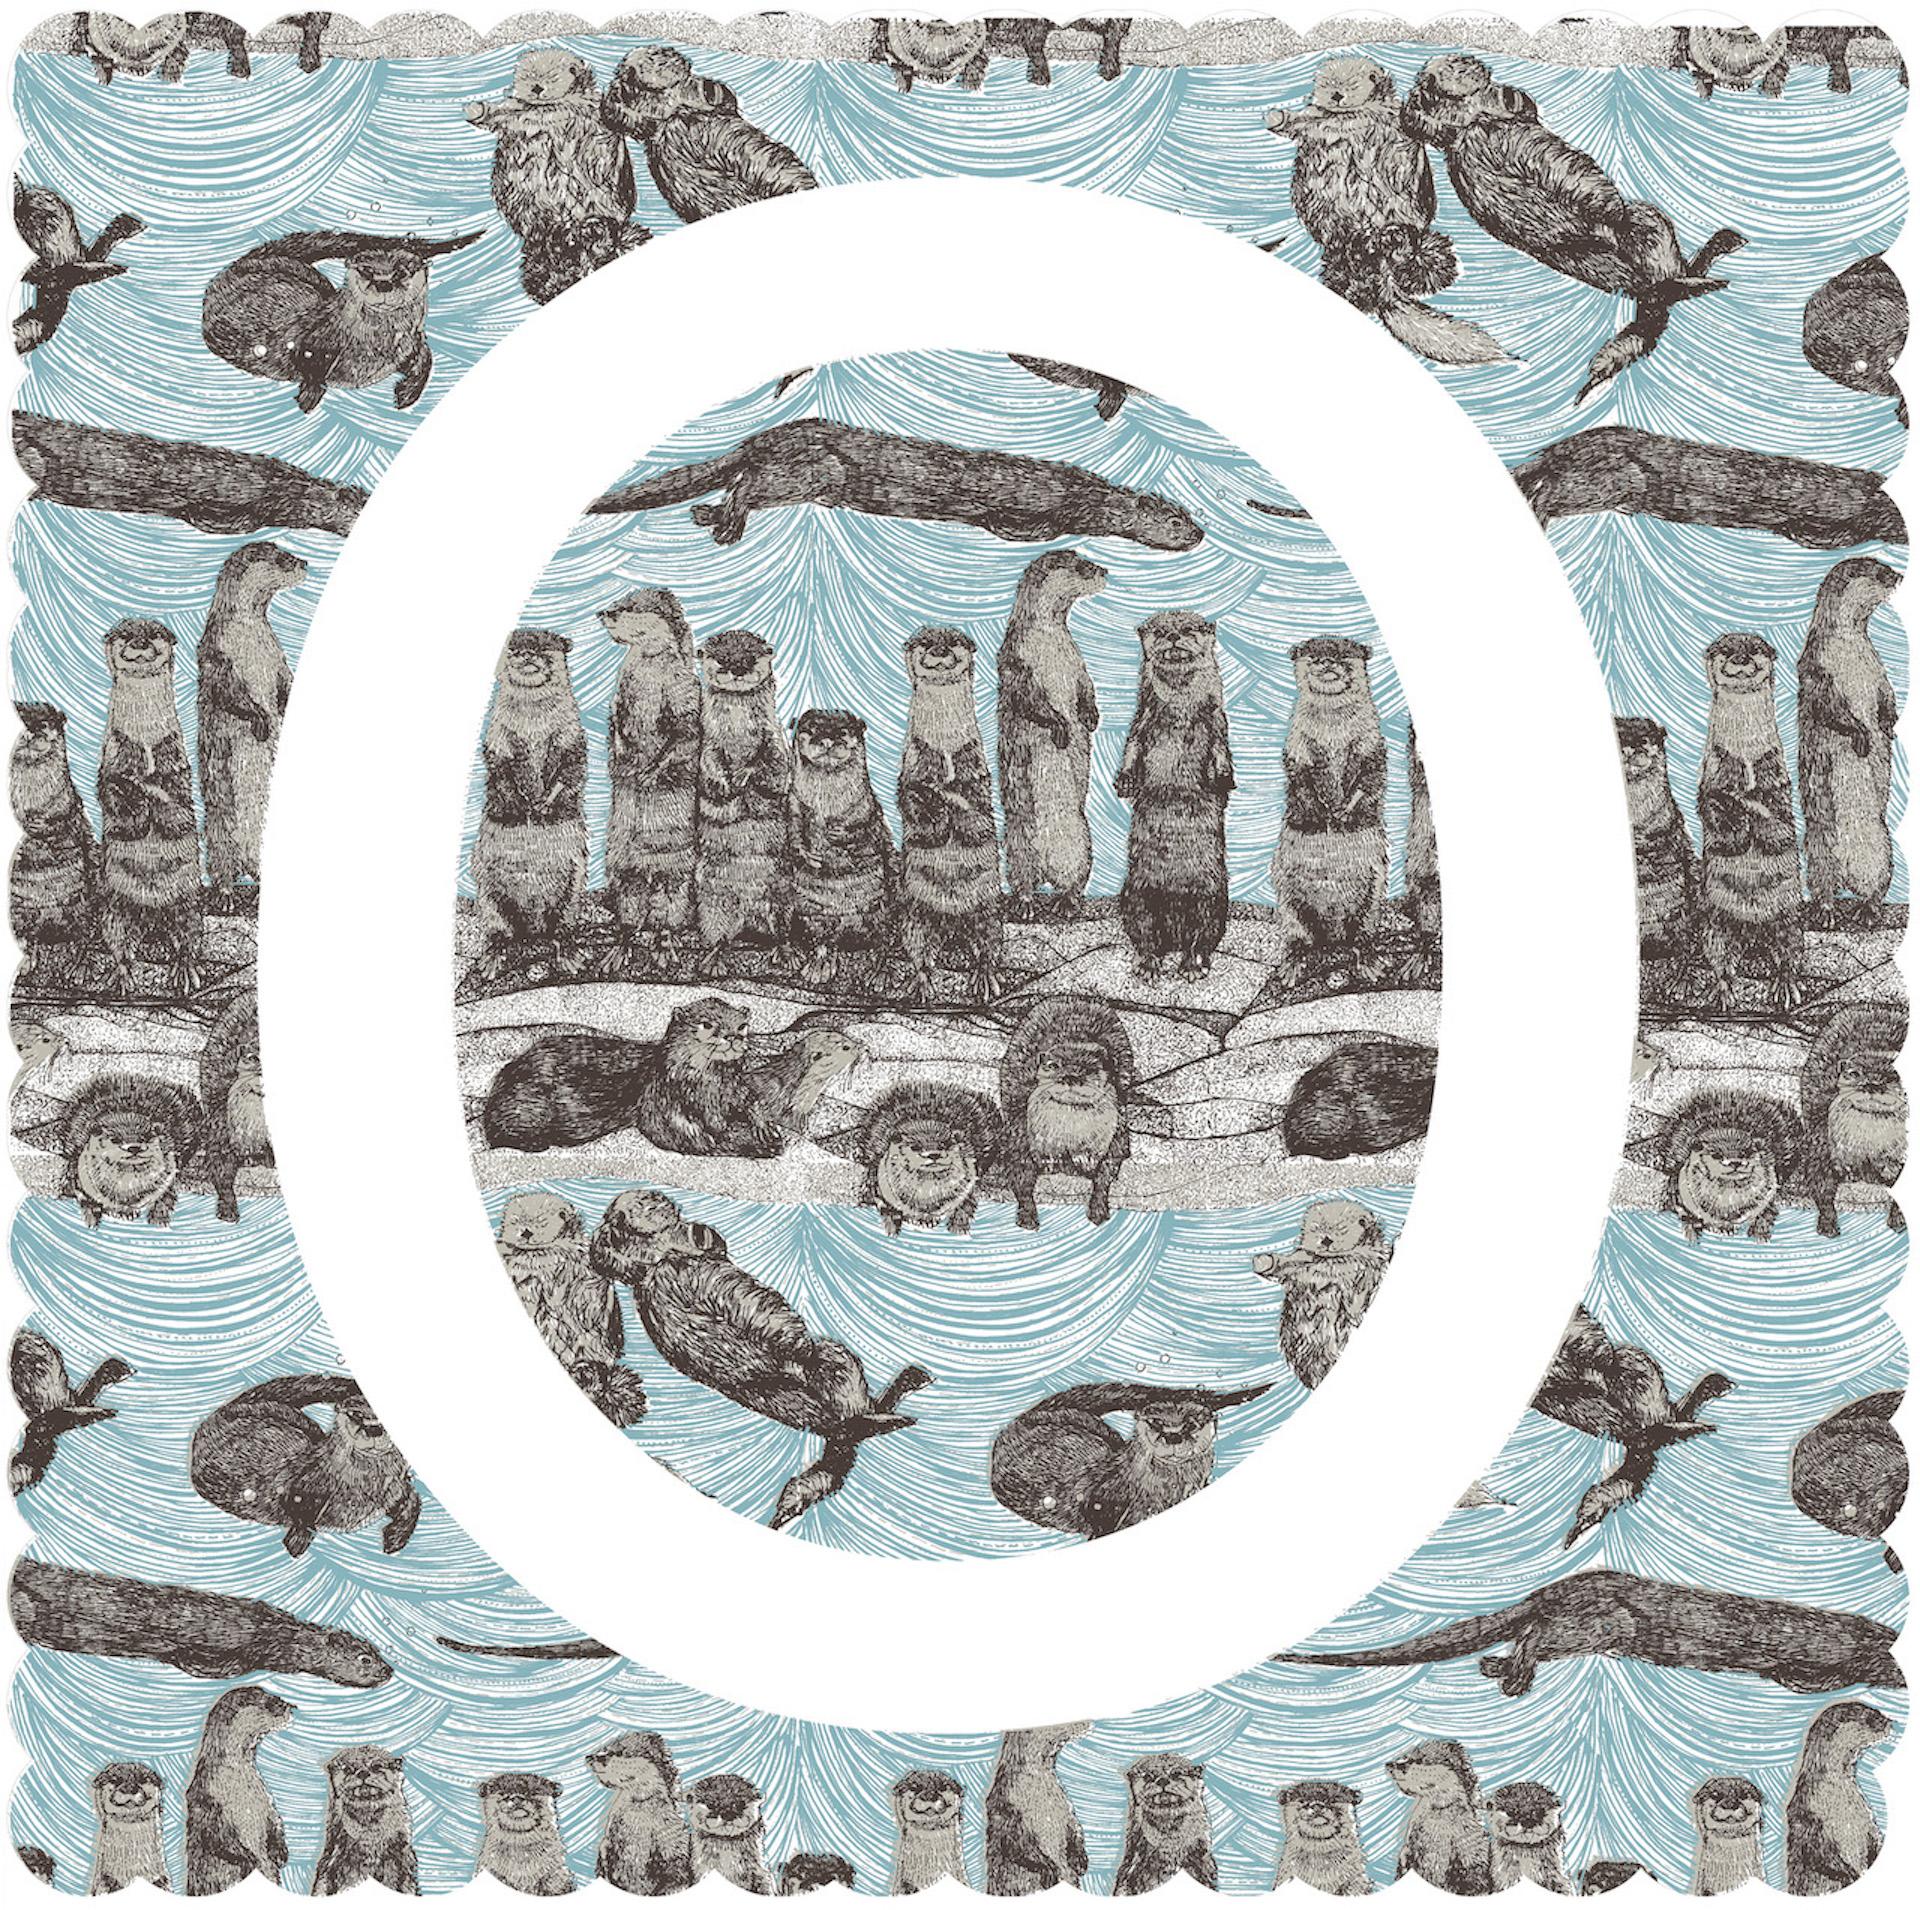 Clare Halifax, O is for Otter, Limited Edition Animal Print, Contemporary Art